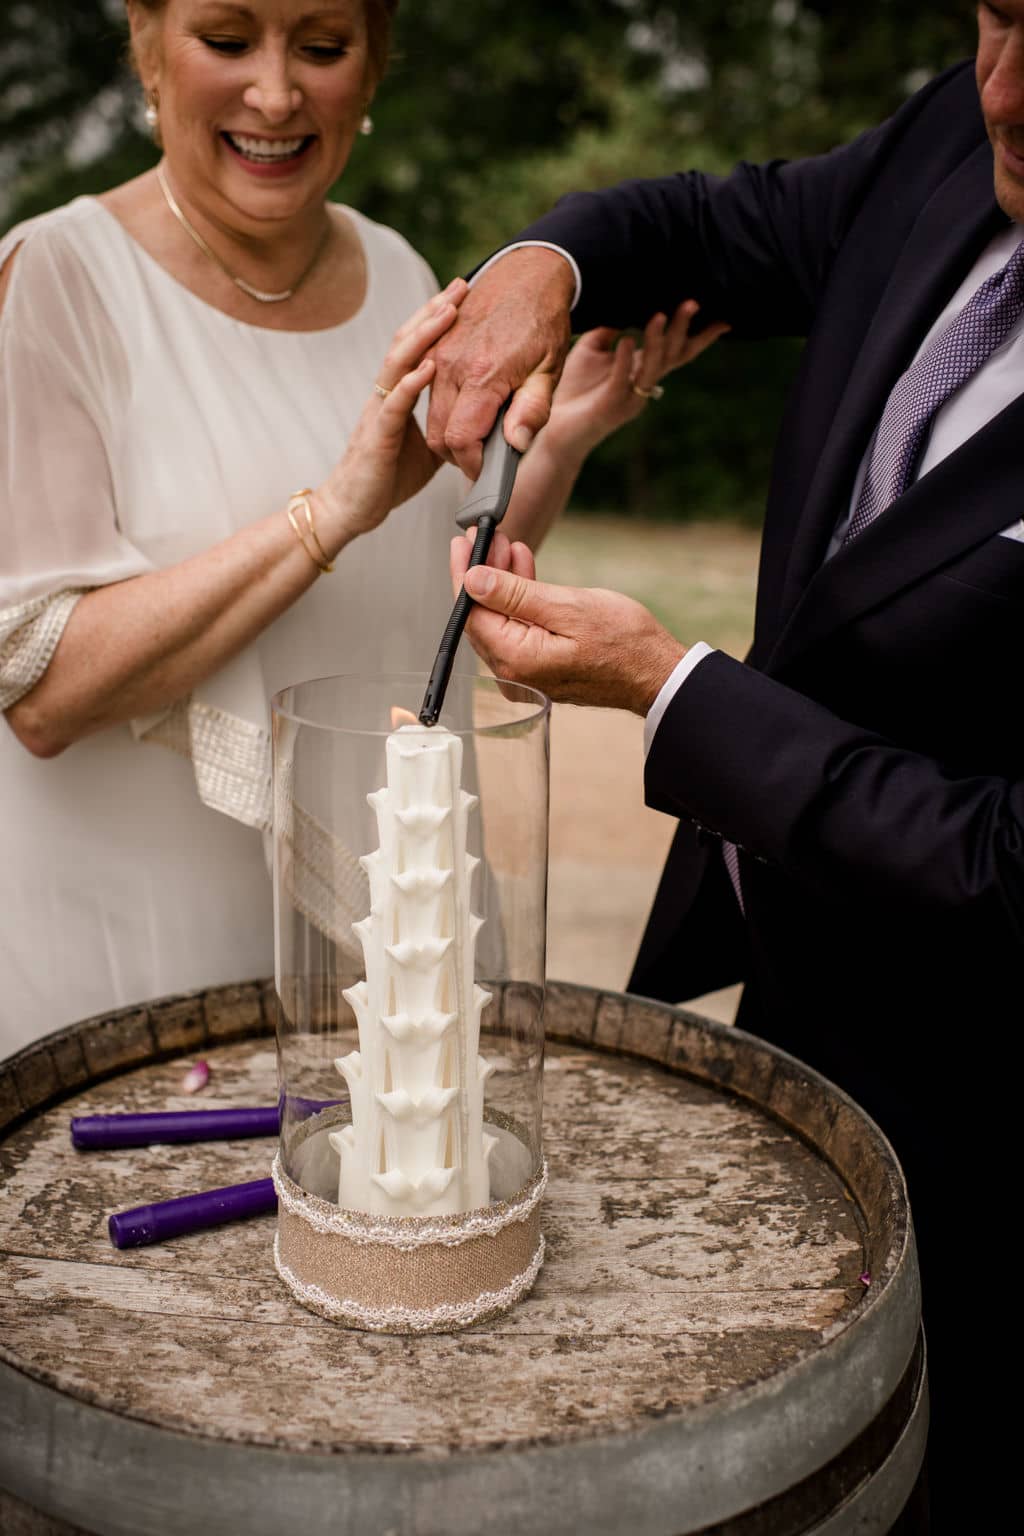 the husband and wife light a candle for their vow renewal